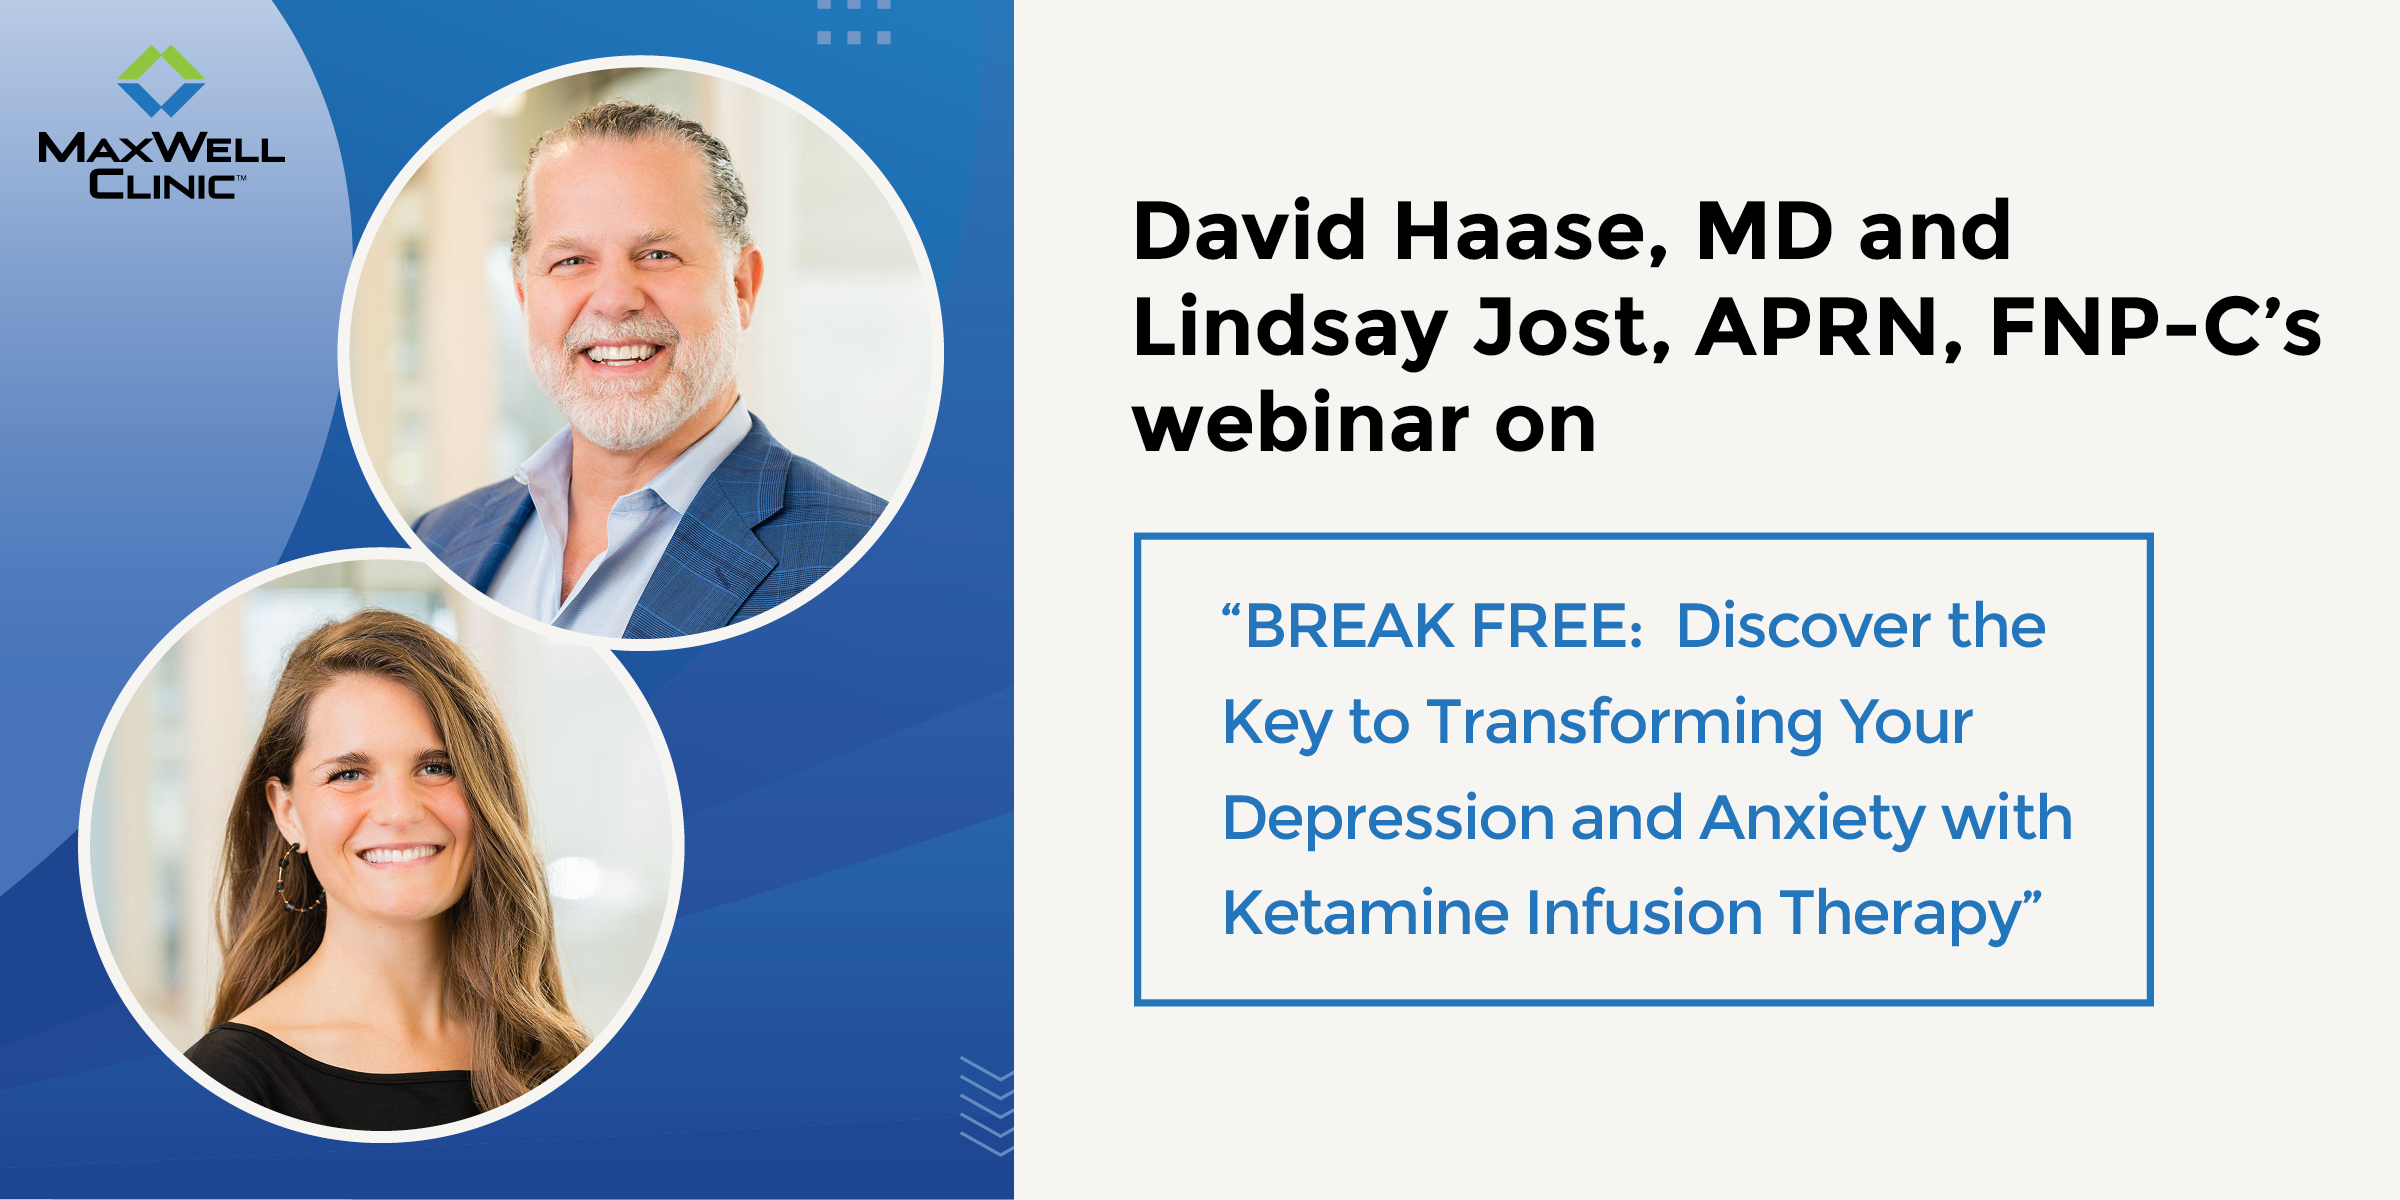 Break Free: Discover the Key to Transforming Your Depression and Anxiety with Ketamine Infusion Therapy